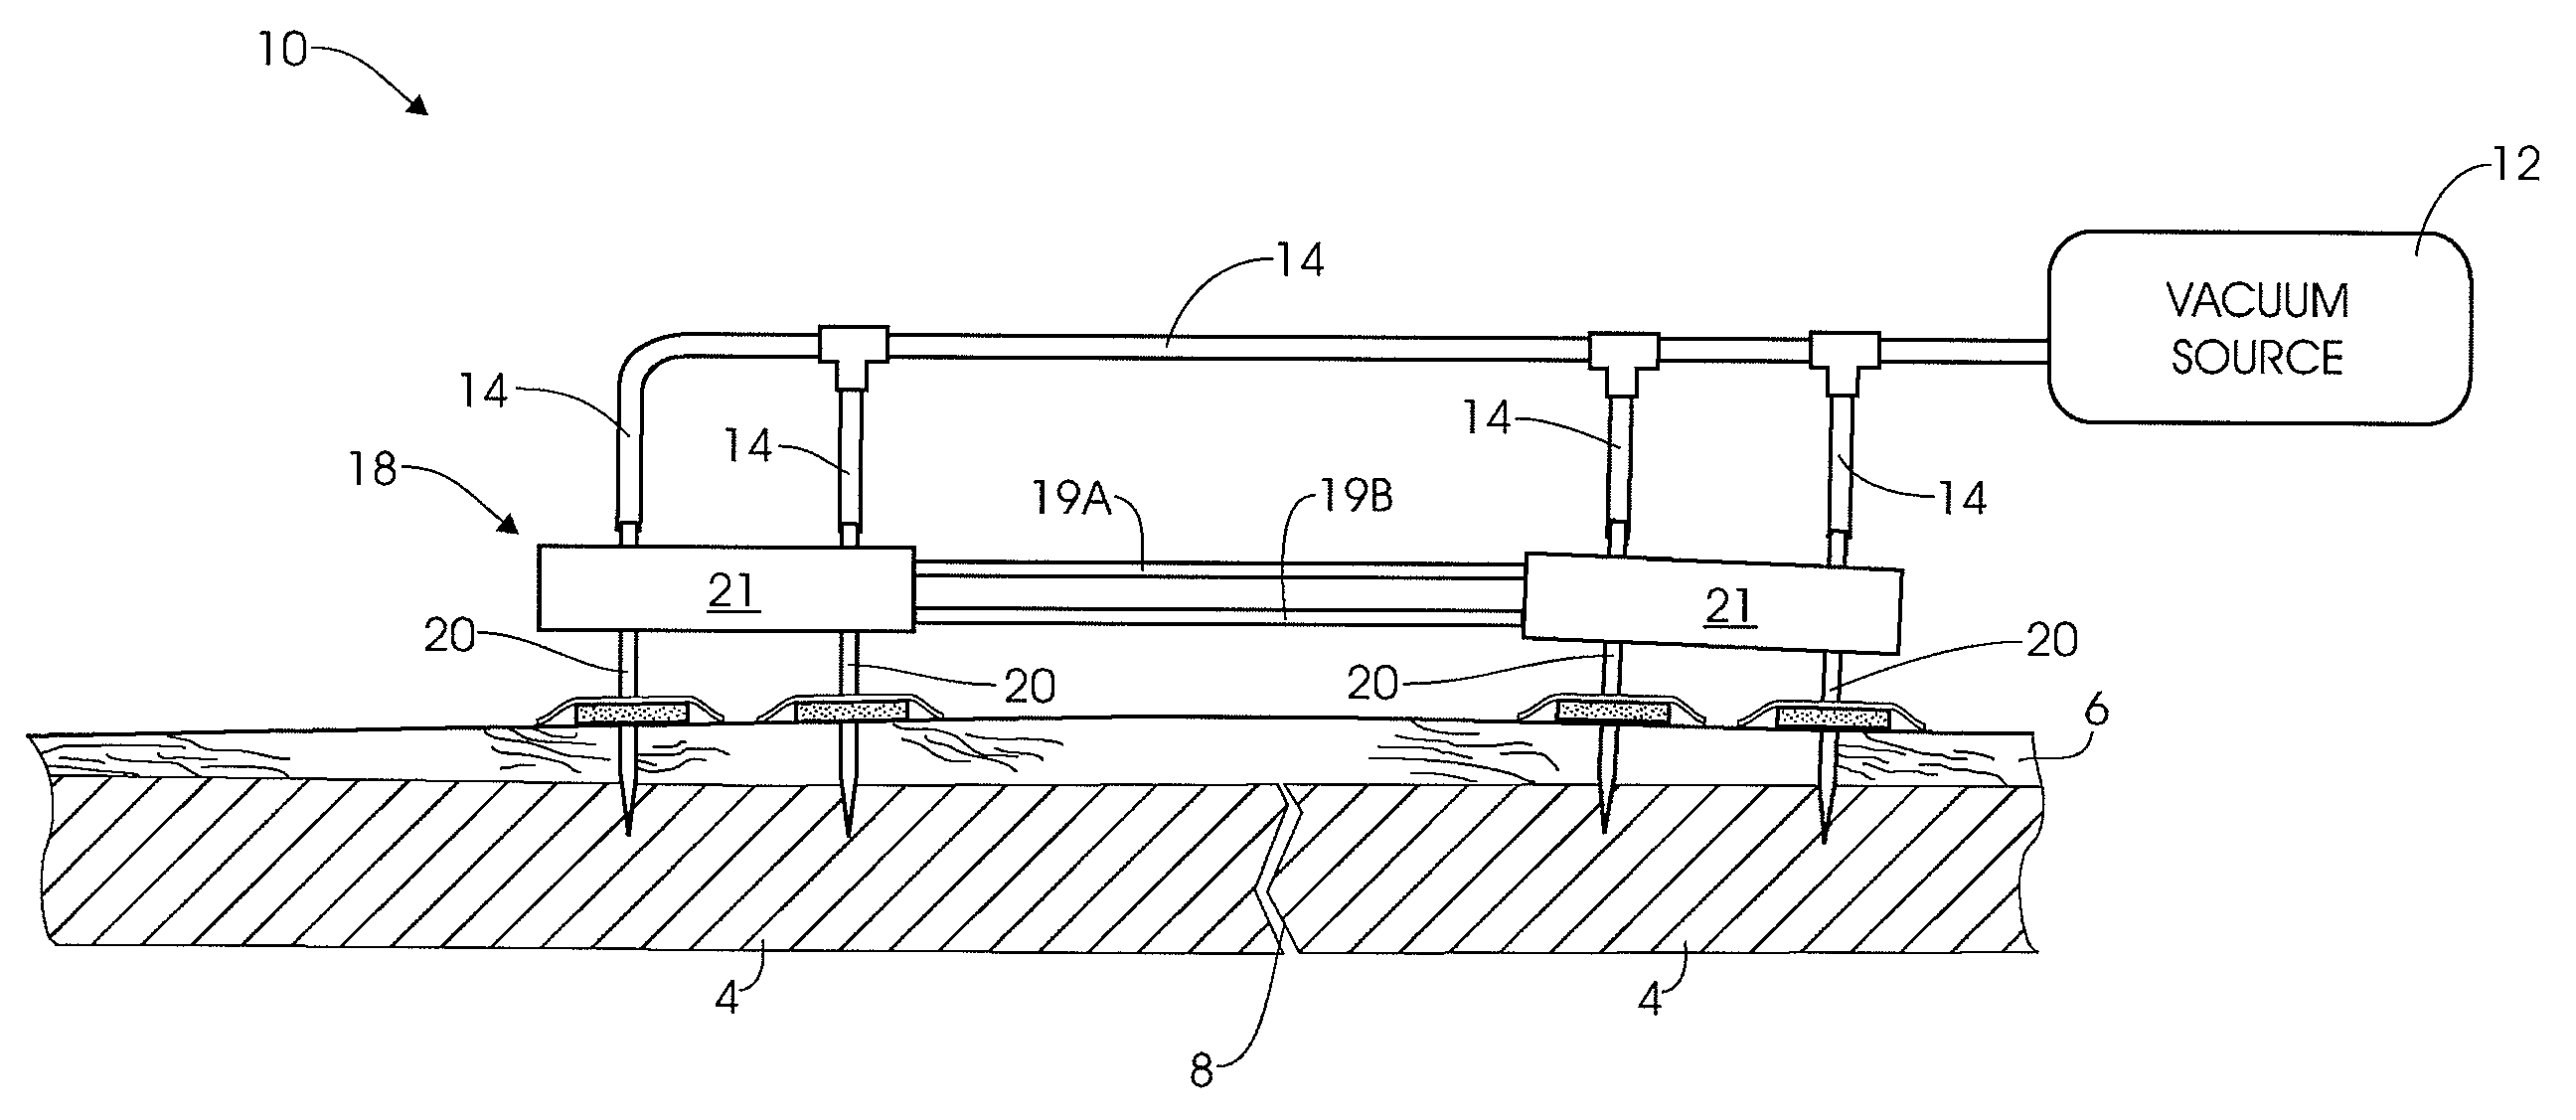 External fixation assembly and method of use